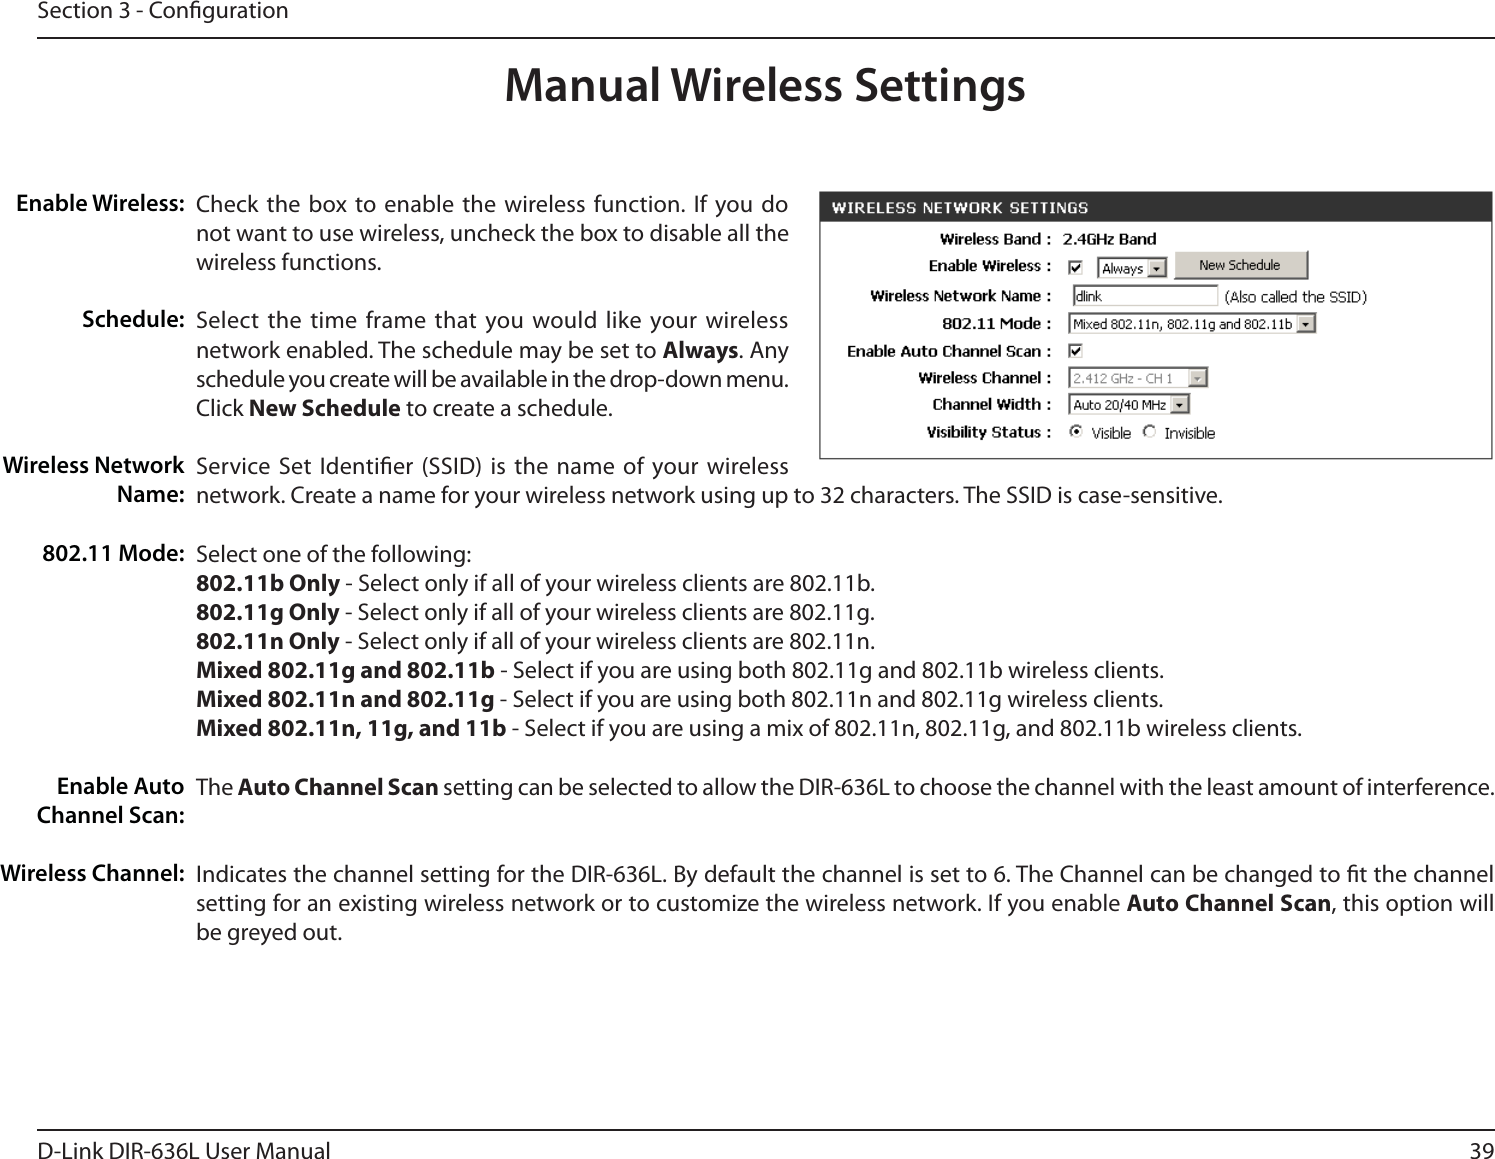 39D-Link DIR-636L User ManualSection 3 - CongurationCheck the box to enable the wireless function. If you do not want to use wireless, uncheck the box to disable all the wireless functions.Select the time frame that you would like your wireless network enabled. The schedule may be set to Always. Any schedule you create will be available in the drop-down menu. Click New Schedule to create a schedule.Service Set Identier (SSID) is the name of your wireless network. Create a name for your wireless network using up to 32 characters. The SSID is case-sensitive.Select one of the following:802.11b Only - Select only if all of your wireless clients are 802.11b.802.11g Only - Select only if all of your wireless clients are 802.11g.802.11n Only - Select only if all of your wireless clients are 802.11n.Mixed 802.11g and 802.11b - Select if you are using both 802.11g and 802.11b wireless clients.Mixed 802.11n and 802.11g - Select if you are using both 802.11n and 802.11g wireless clients.Mixed 802.11n, 11g, and 11b - Select if you are using a mix of 802.11n, 802.11g, and 802.11b wireless clients.The Auto Channel Scan setting can be selected to allow the DIR-636L to choose the channel with the least amount of interference.Indicates the channel setting for the DIR-636L. By default the channel is set to 6. The Channel can be changed to t the channel setting for an existing wireless network or to customize the wireless network. If you enable Auto Channel Scan, this option will be greyed out.Enable Wireless:Schedule:Wireless Network Name:802.11 Mode:Enable Auto Channel Scan:Wireless Channel:Manual Wireless Settings